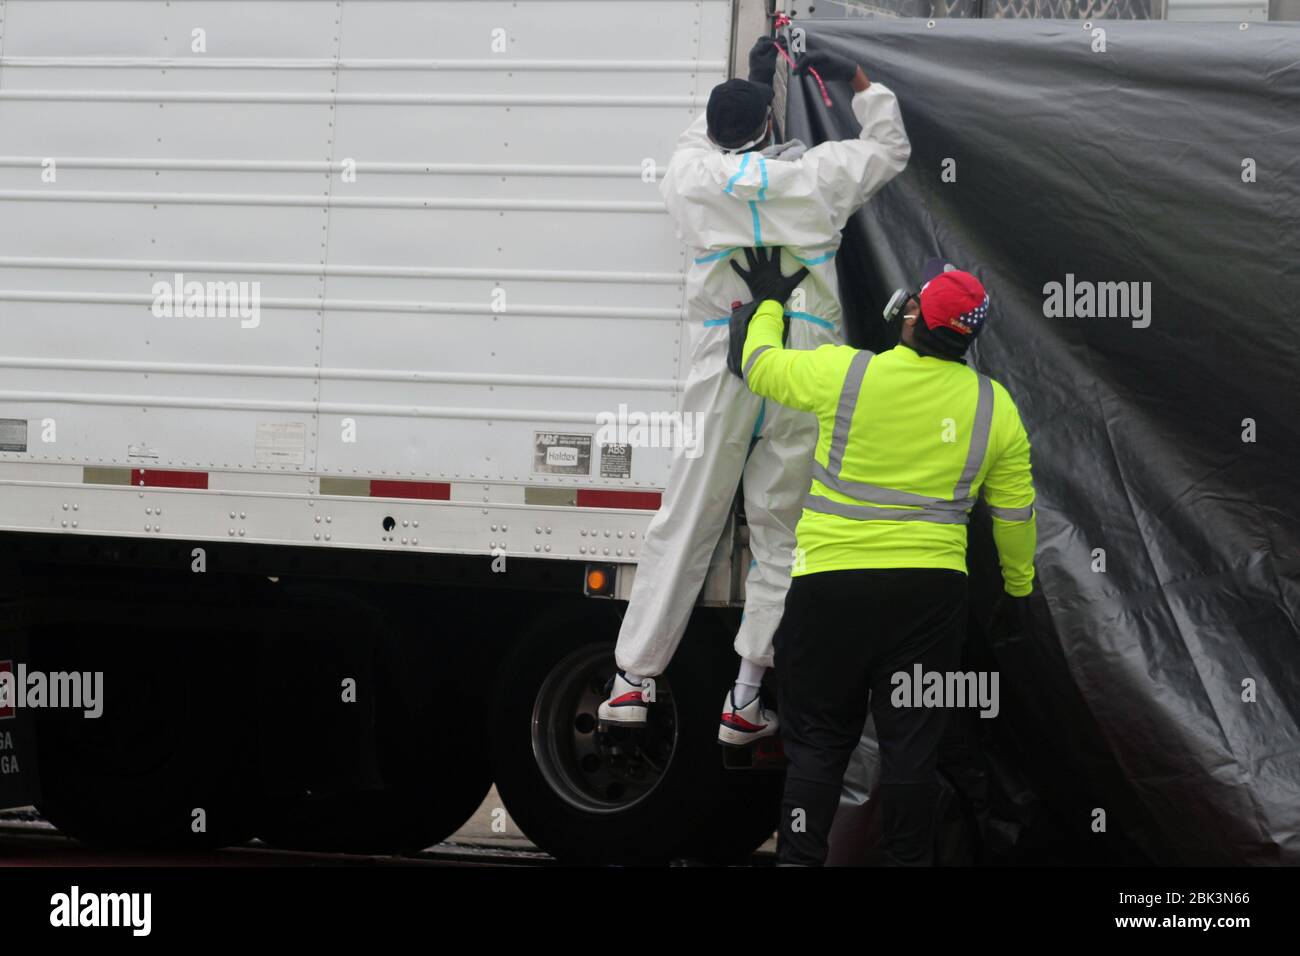 April 30, 2020, New York, New York, USA: The man in a yellow t-shirt supports with his hand his co-worker dressed in a hazmat, who fixes a tarpaulin at the back of a big refrigerated truck to be out of sight next to the Andrew T. Cleckley Funeral Home in Brooklyn where corpses not properly cared have been removed. 60 bodies were stored in 4 non-refregerated vehiciles lining the street nearby stores. Neighbors reported a foul smell still persistent and fluids dripping from the trucks. The funeral home was overwhelmed by COVID-19 deaths, waiting for weeks for cremations in New York. (Credit Imag Stock Photo